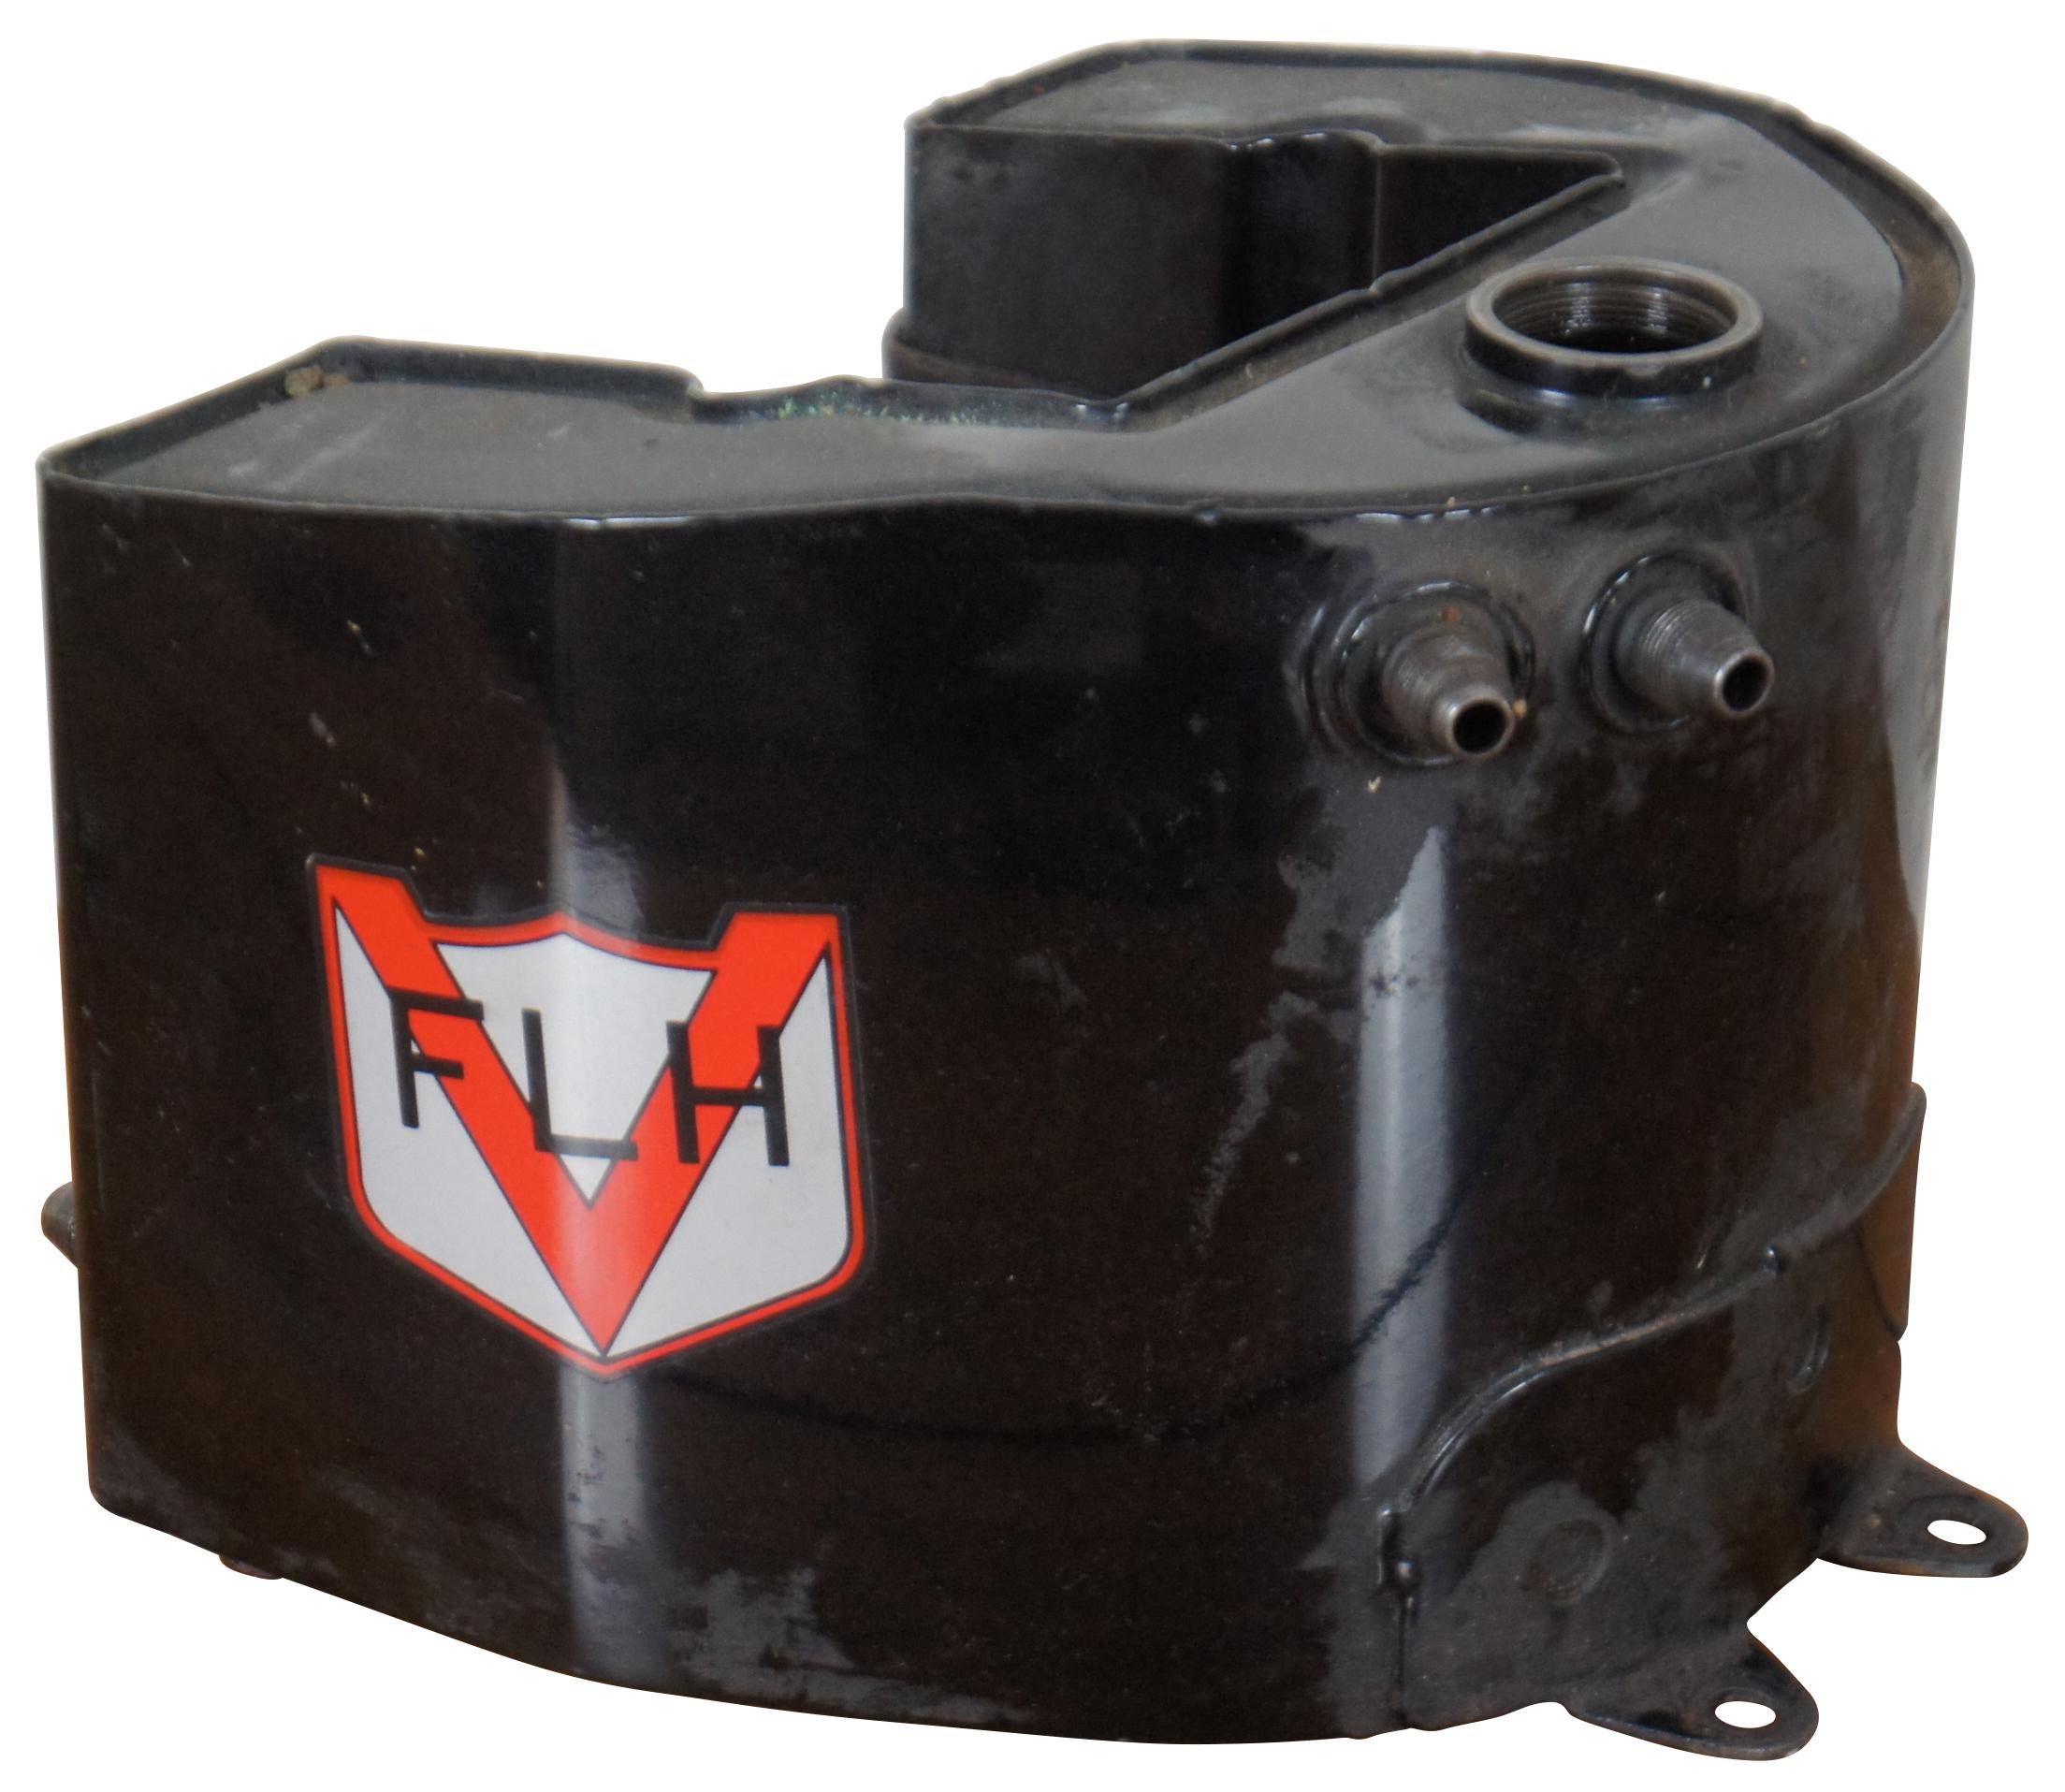 1950s Original Vintage Harley-Davidson Big Twin oil tank for Panhead motorcycles from 1936-1957, finished in black, with chrome plated return oil line. Originally purchased in the 1980s from the Pennsylvania warehouse where a cache of old Harley